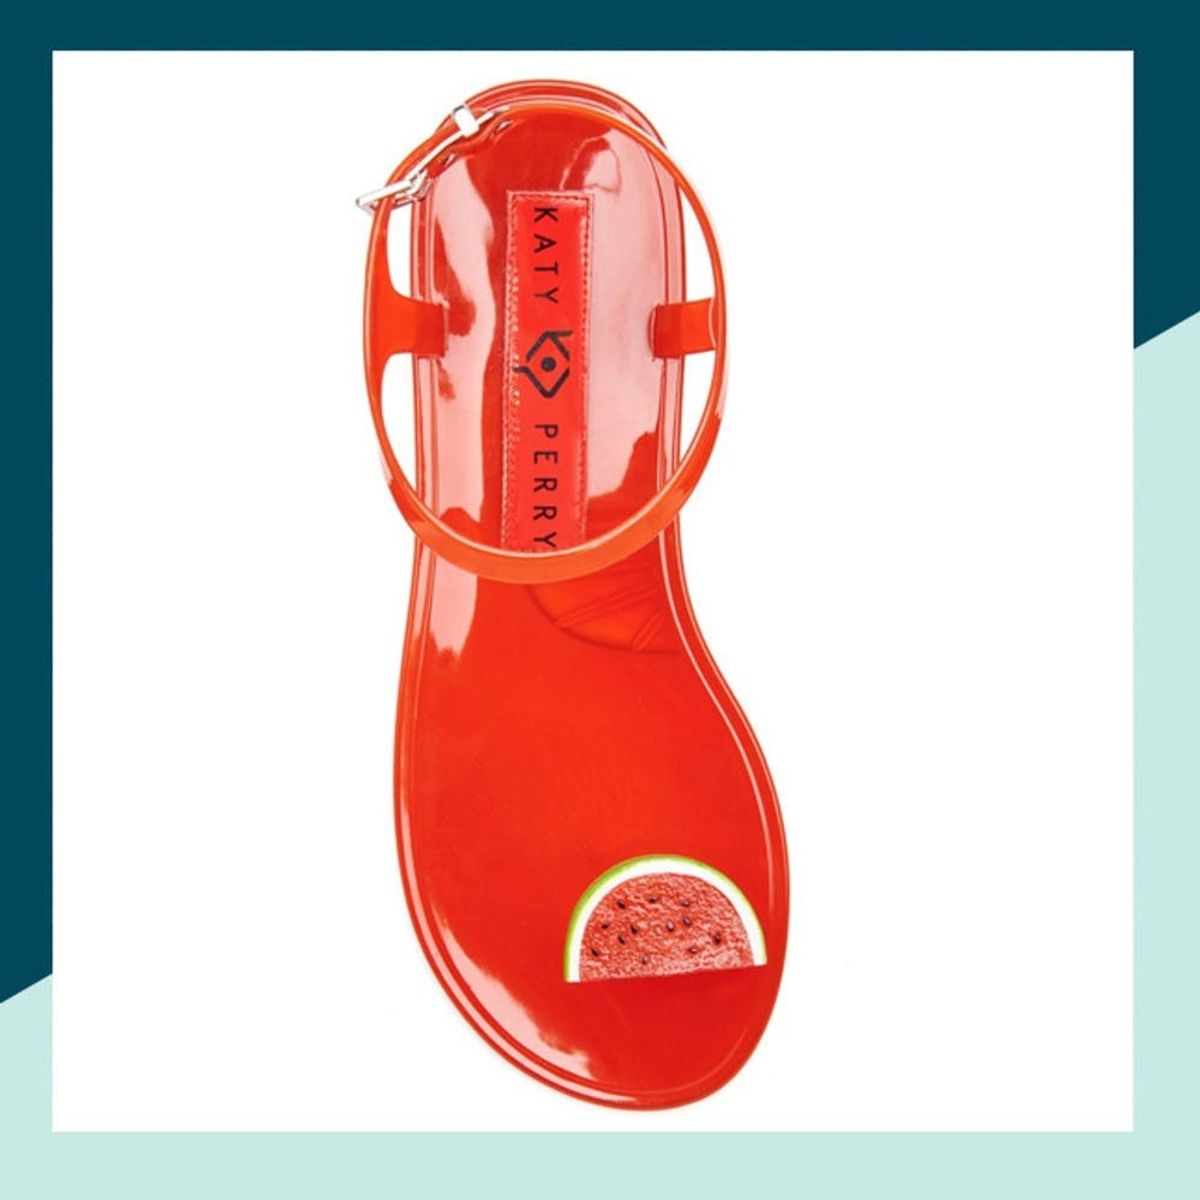 Katy Perry Is Releasing Fruit-Scented Jelly Sandals and They’re Already Selling Out